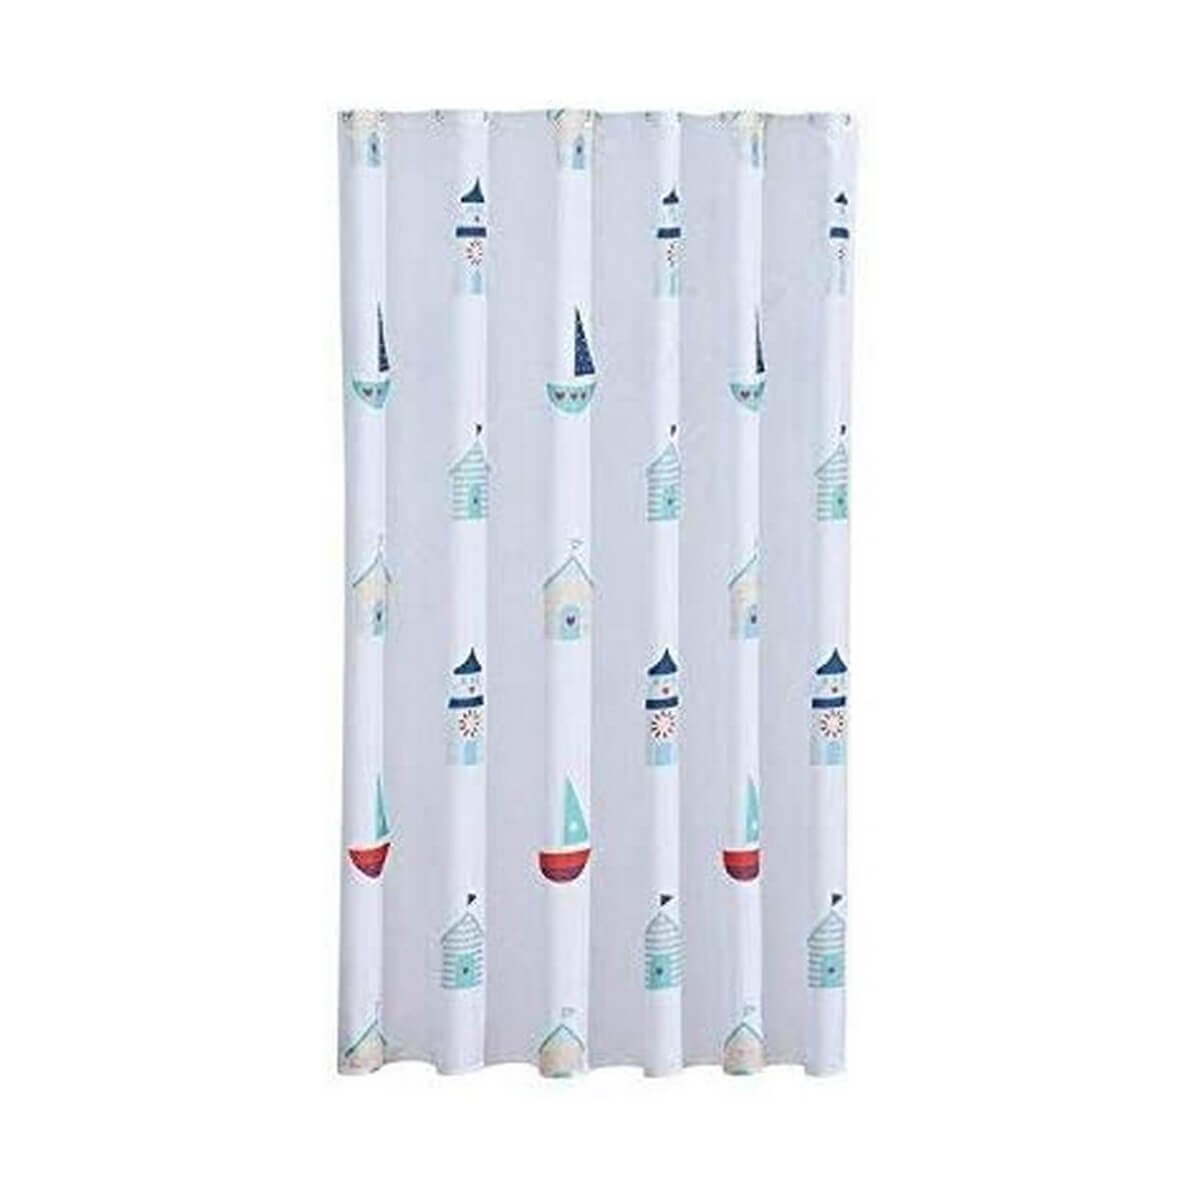 Rust Proof Eyelets Water Repellant Soft Lustre Finish with Weighted Hem AQUALONA Shower Curtain 180cm x 180cm Beach Huts Mildew Resistant 100% Polyester 